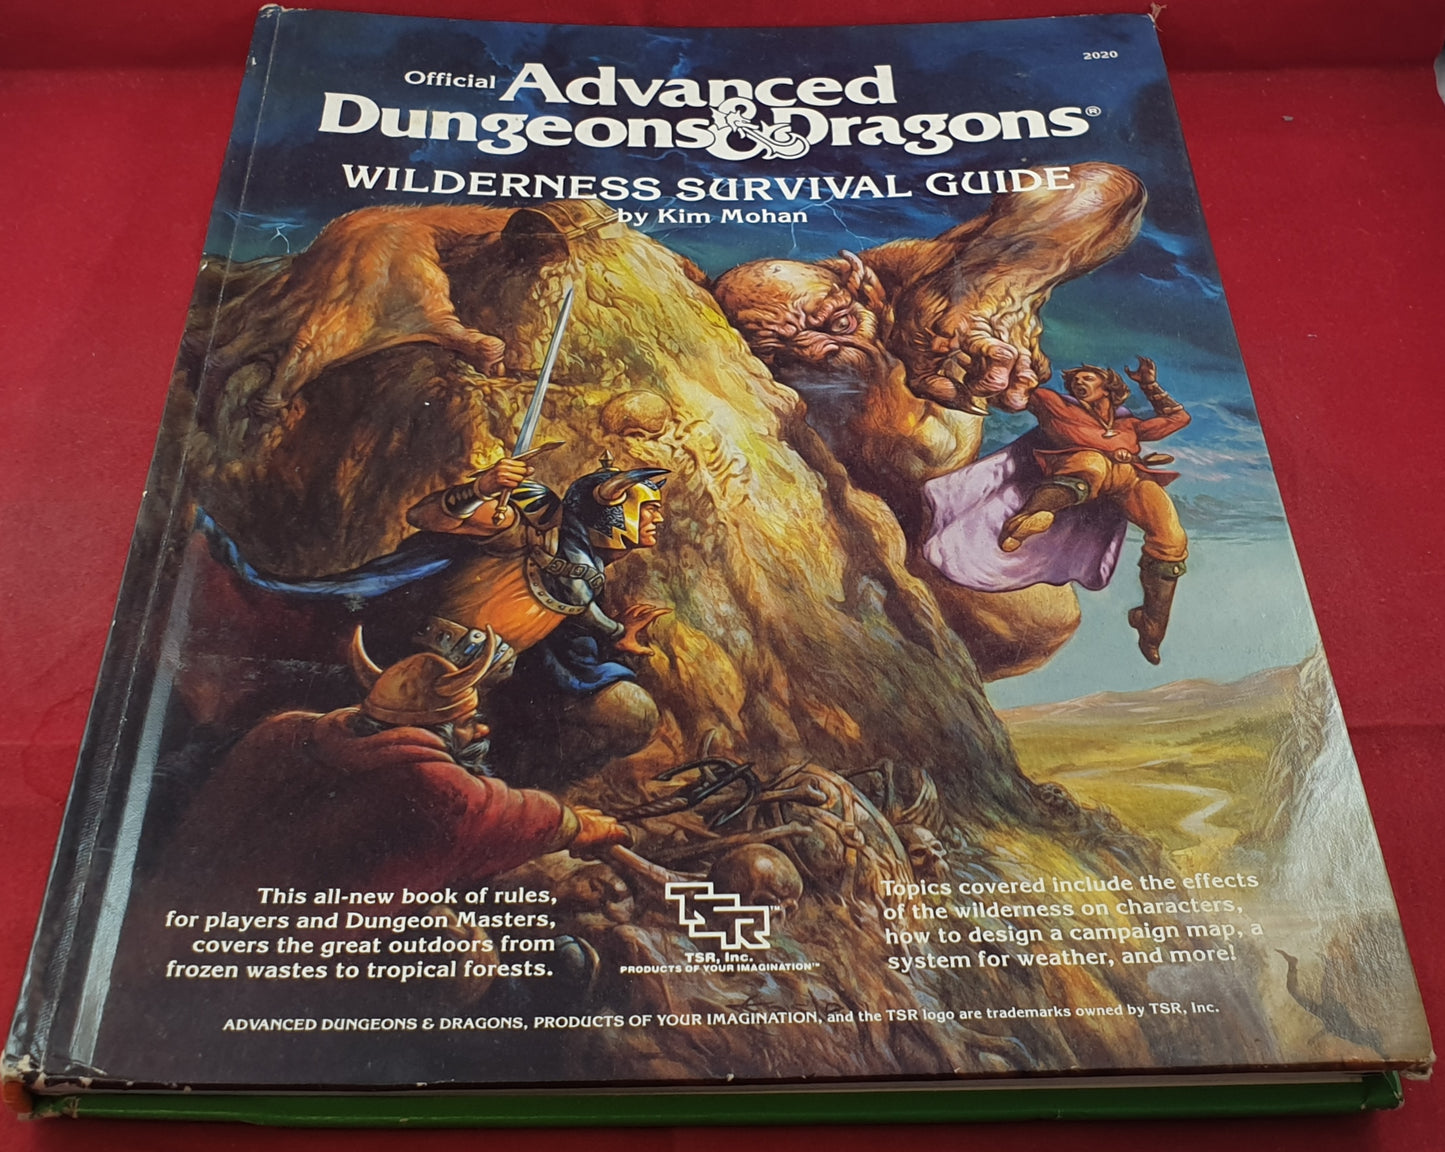 Official Advanced Dungeon & Dragons Wilderness Survival Guide Book Hardcover